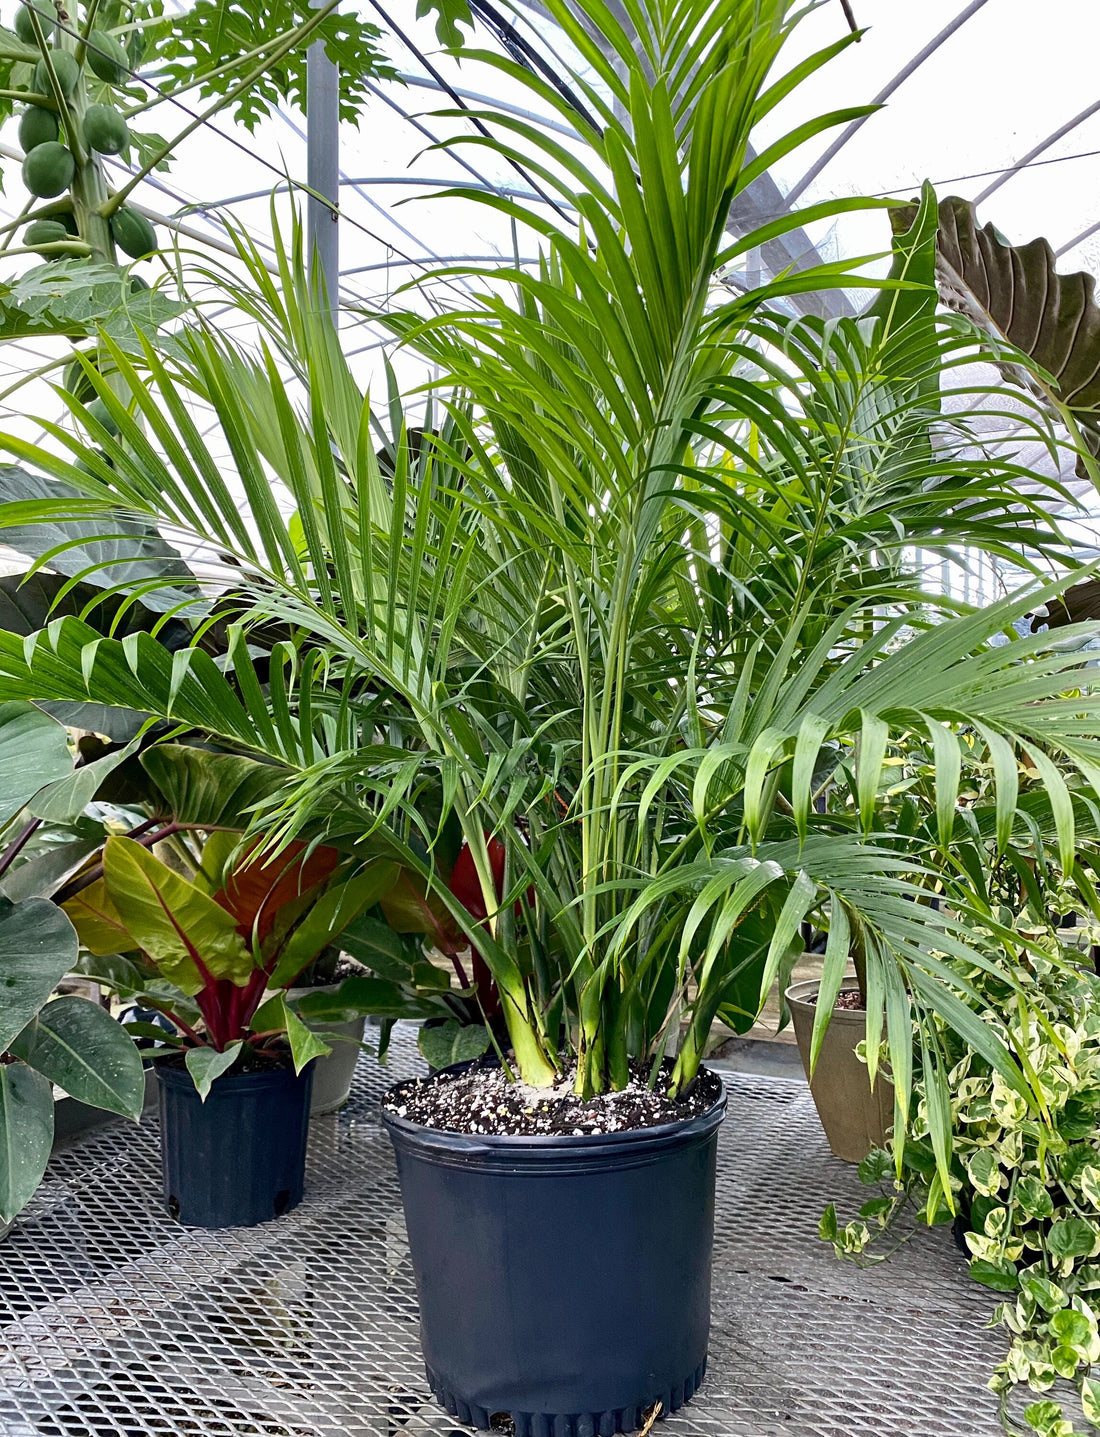 Cat Palm, Live Tropical Plant Indoor